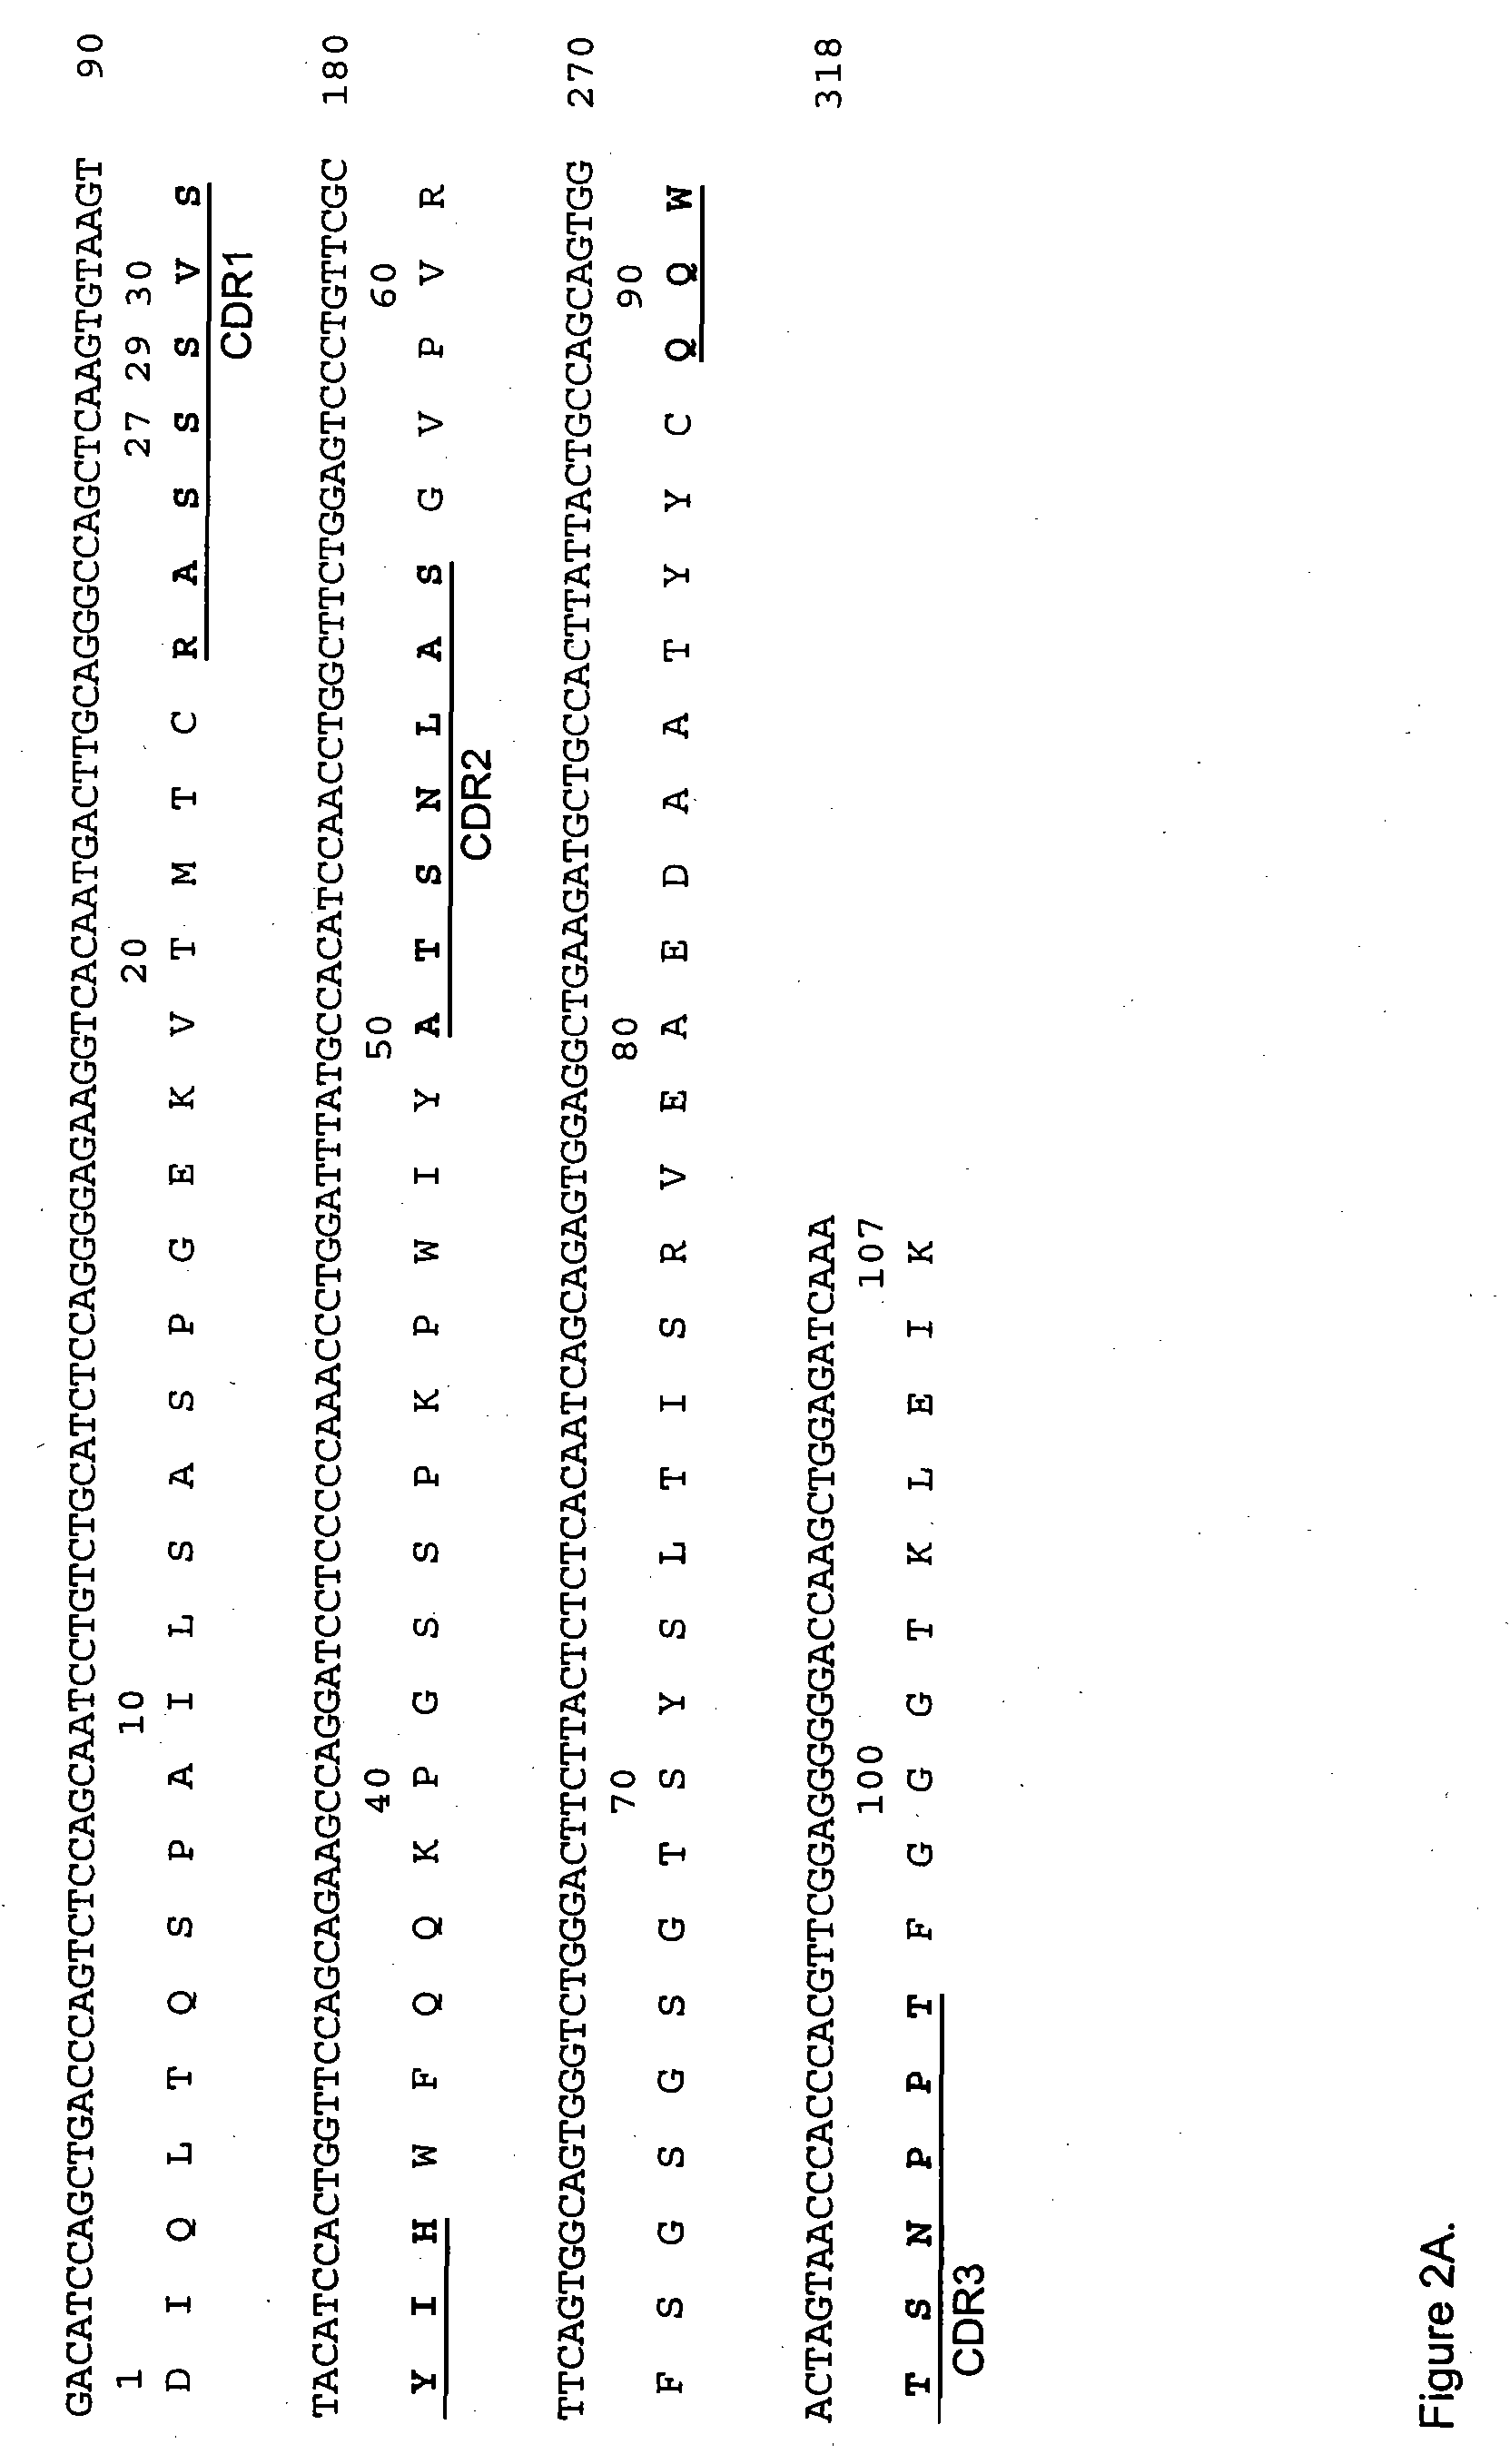 Anti-cd20 antibodies and fusion proteins thereof and methods of use